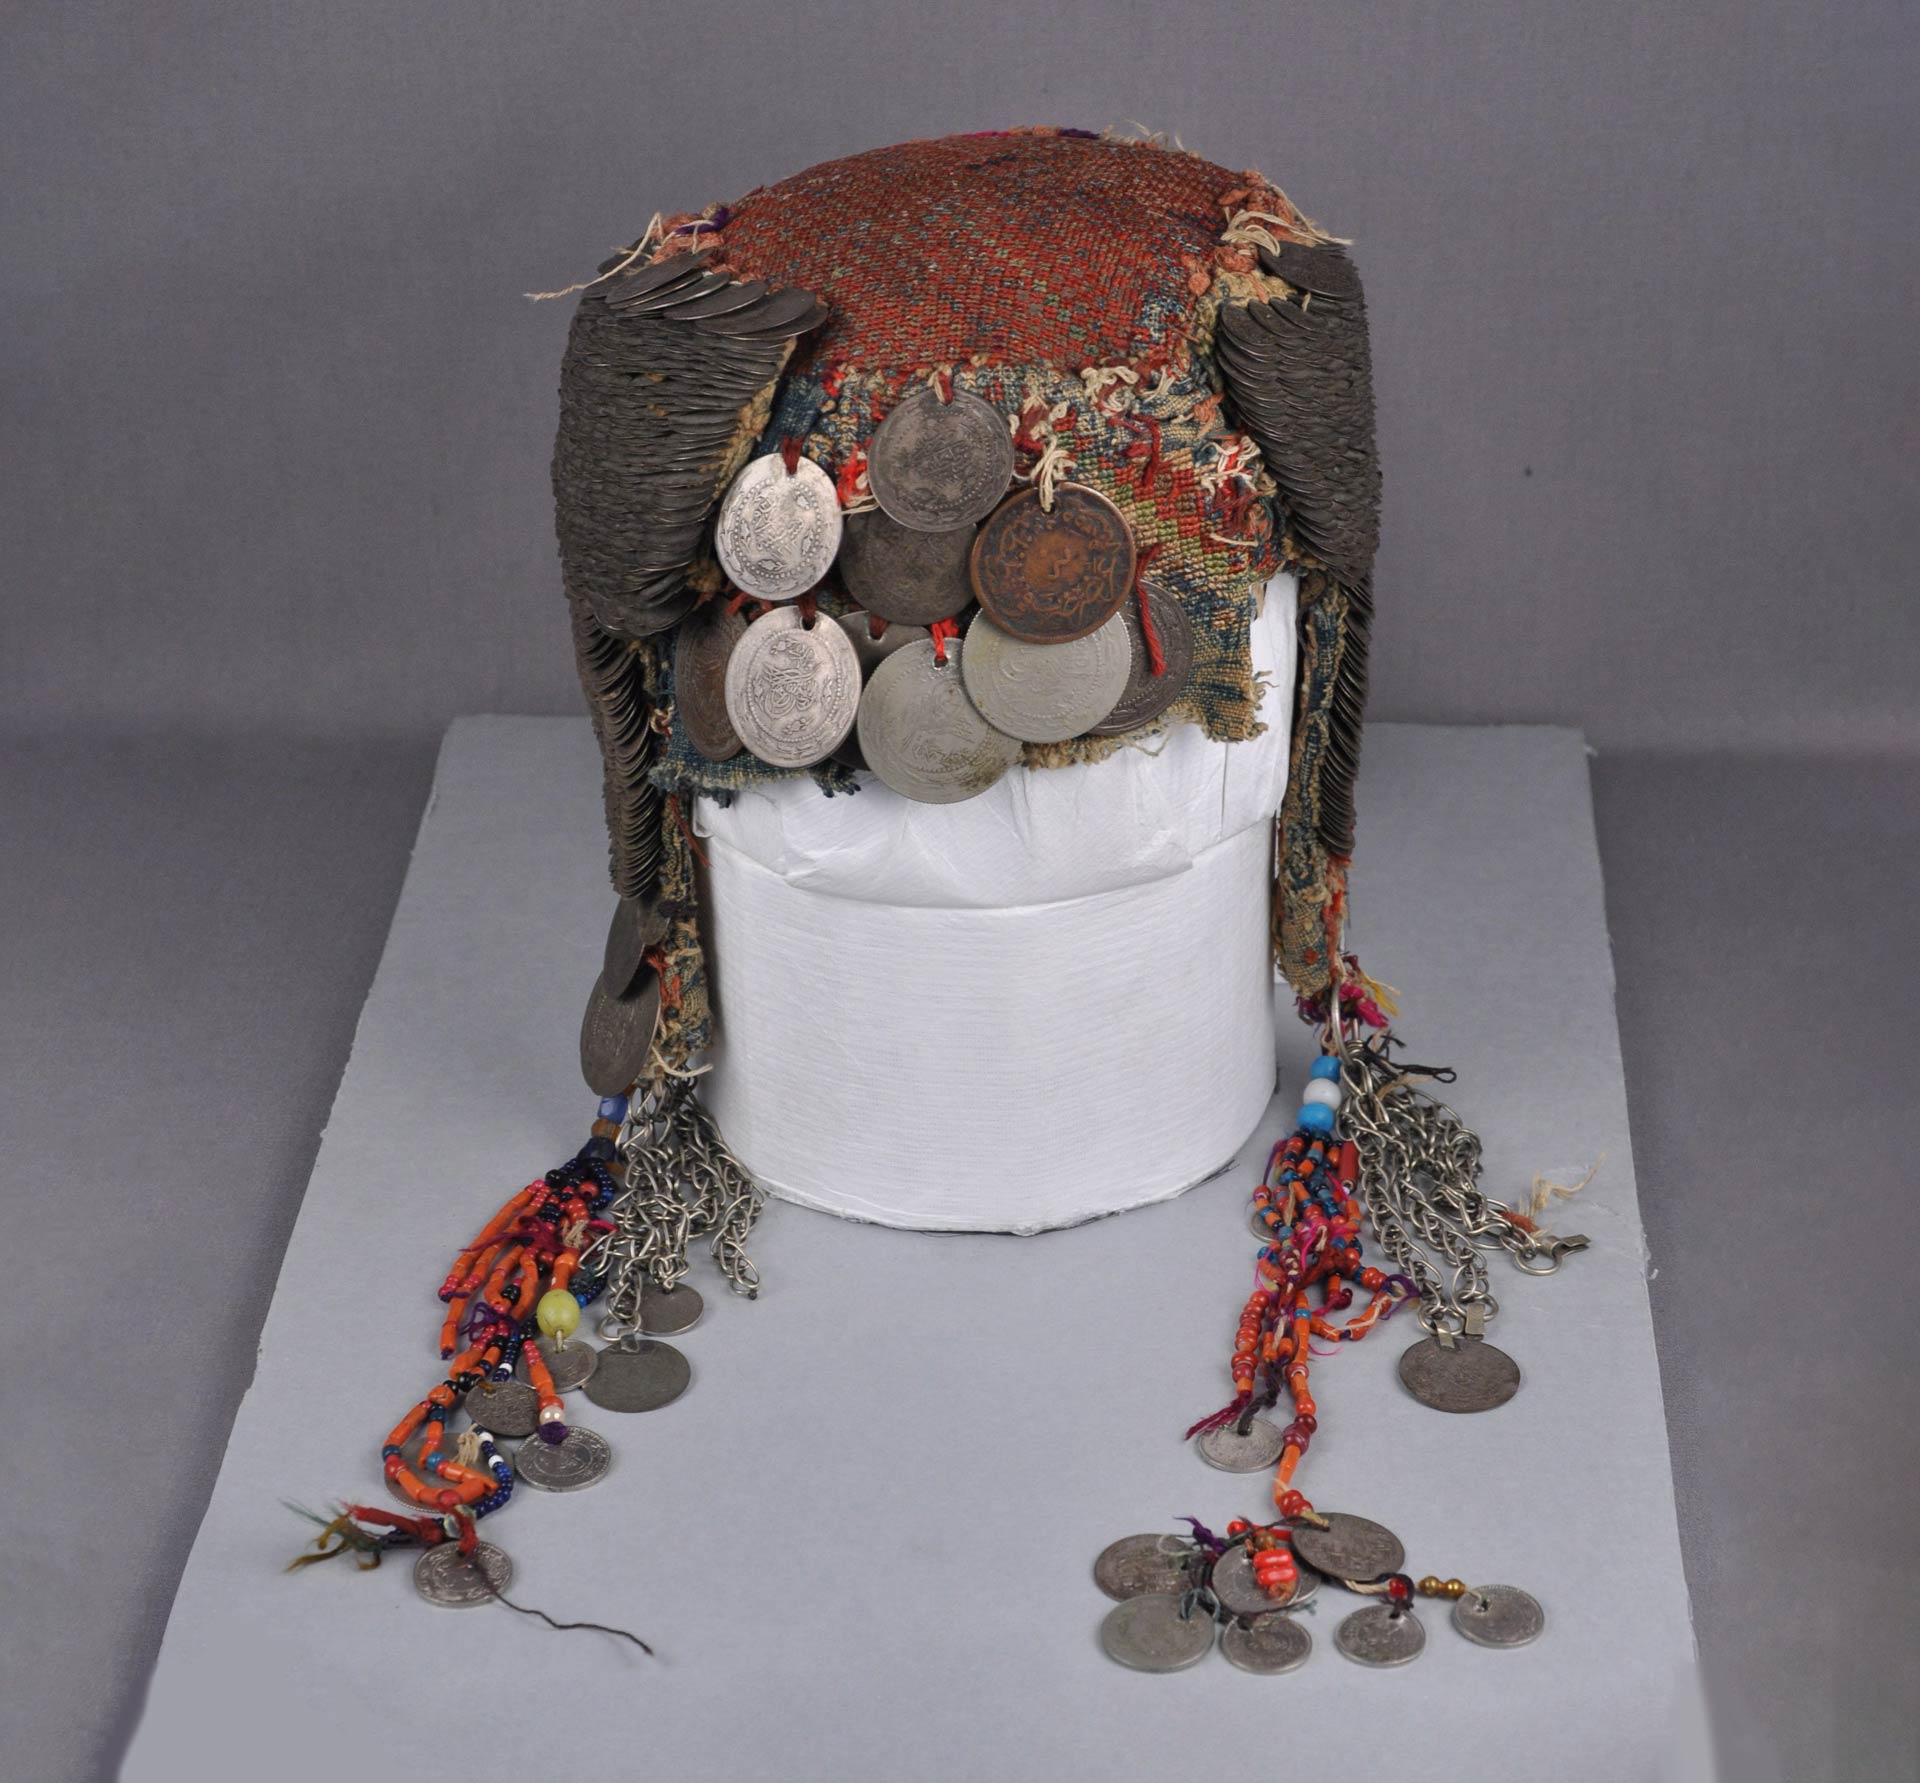 hat with two ear flaps adorned with coins and beads